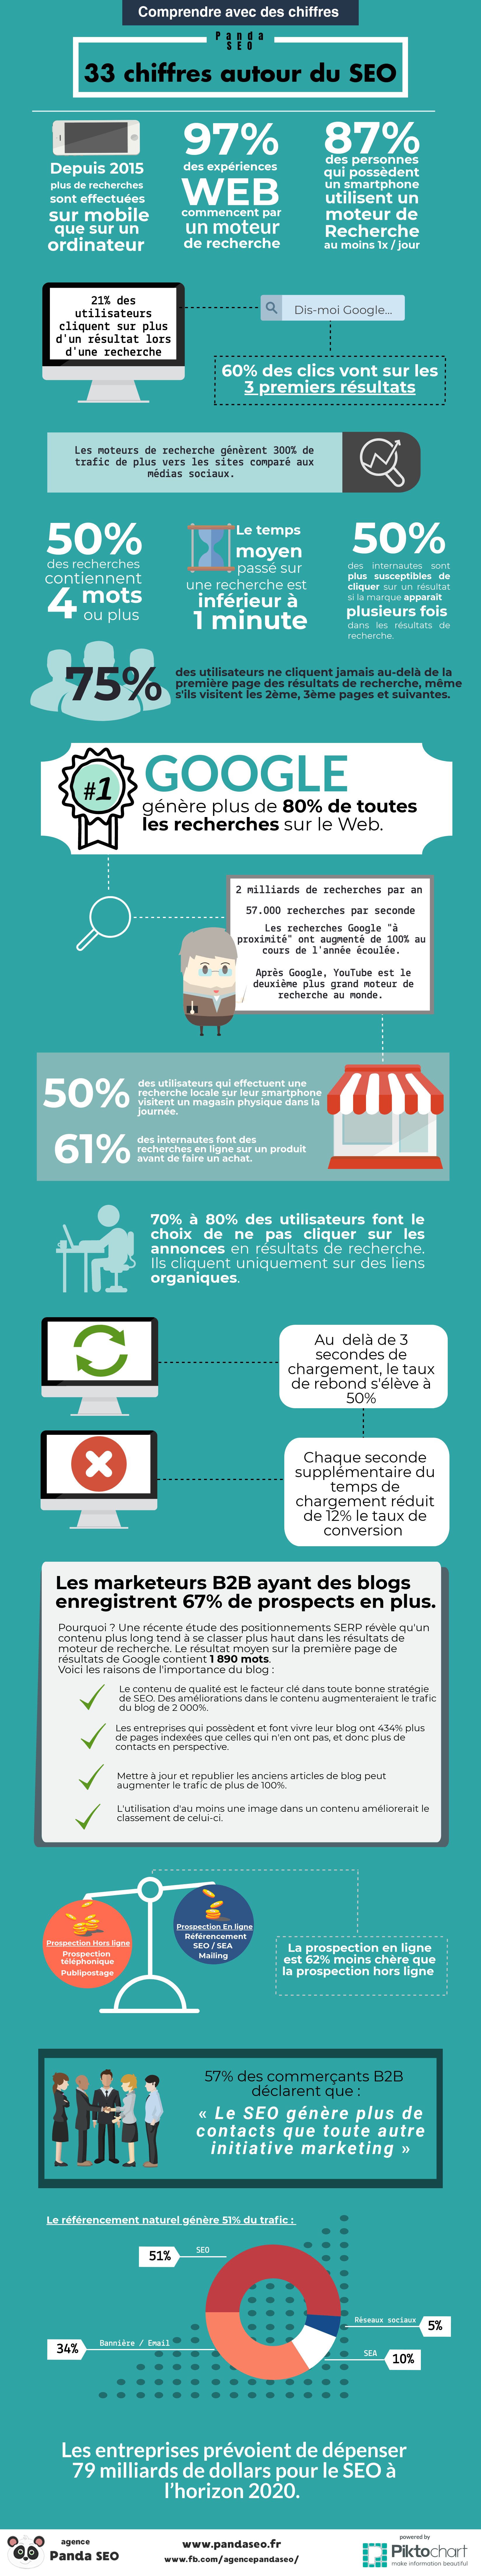 infographie-33-chiffres-seo